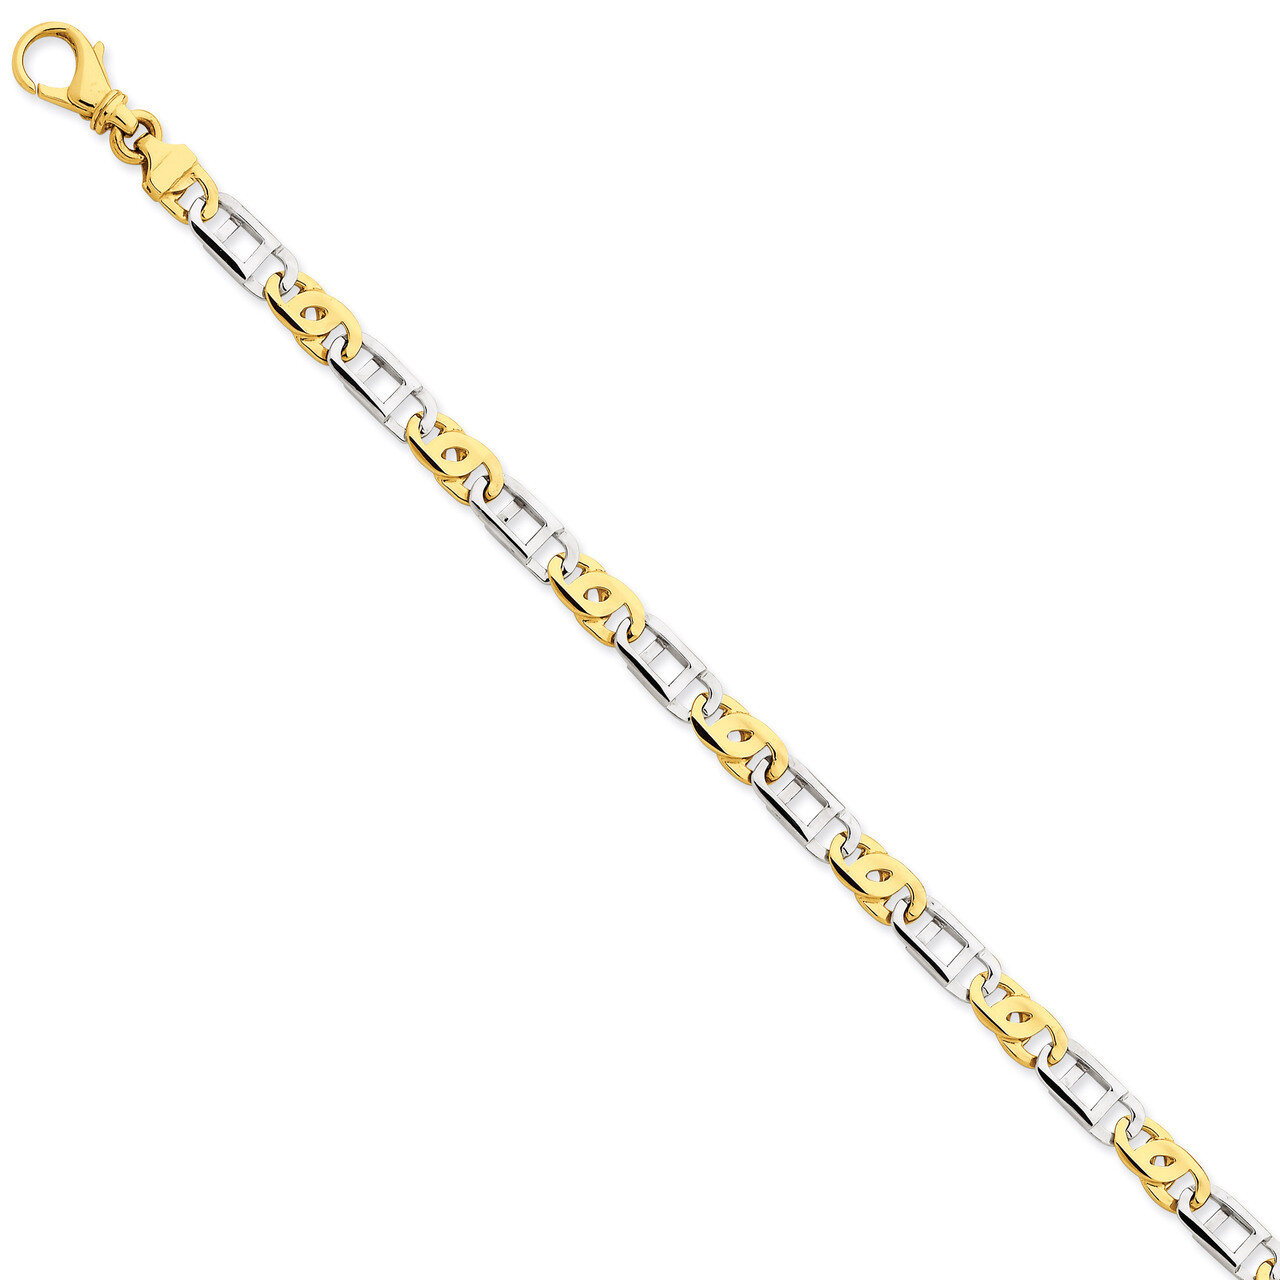 5.8mm Polished Fancy Link Chain 20 Inch 14k Two-Tone Gold LK522-20